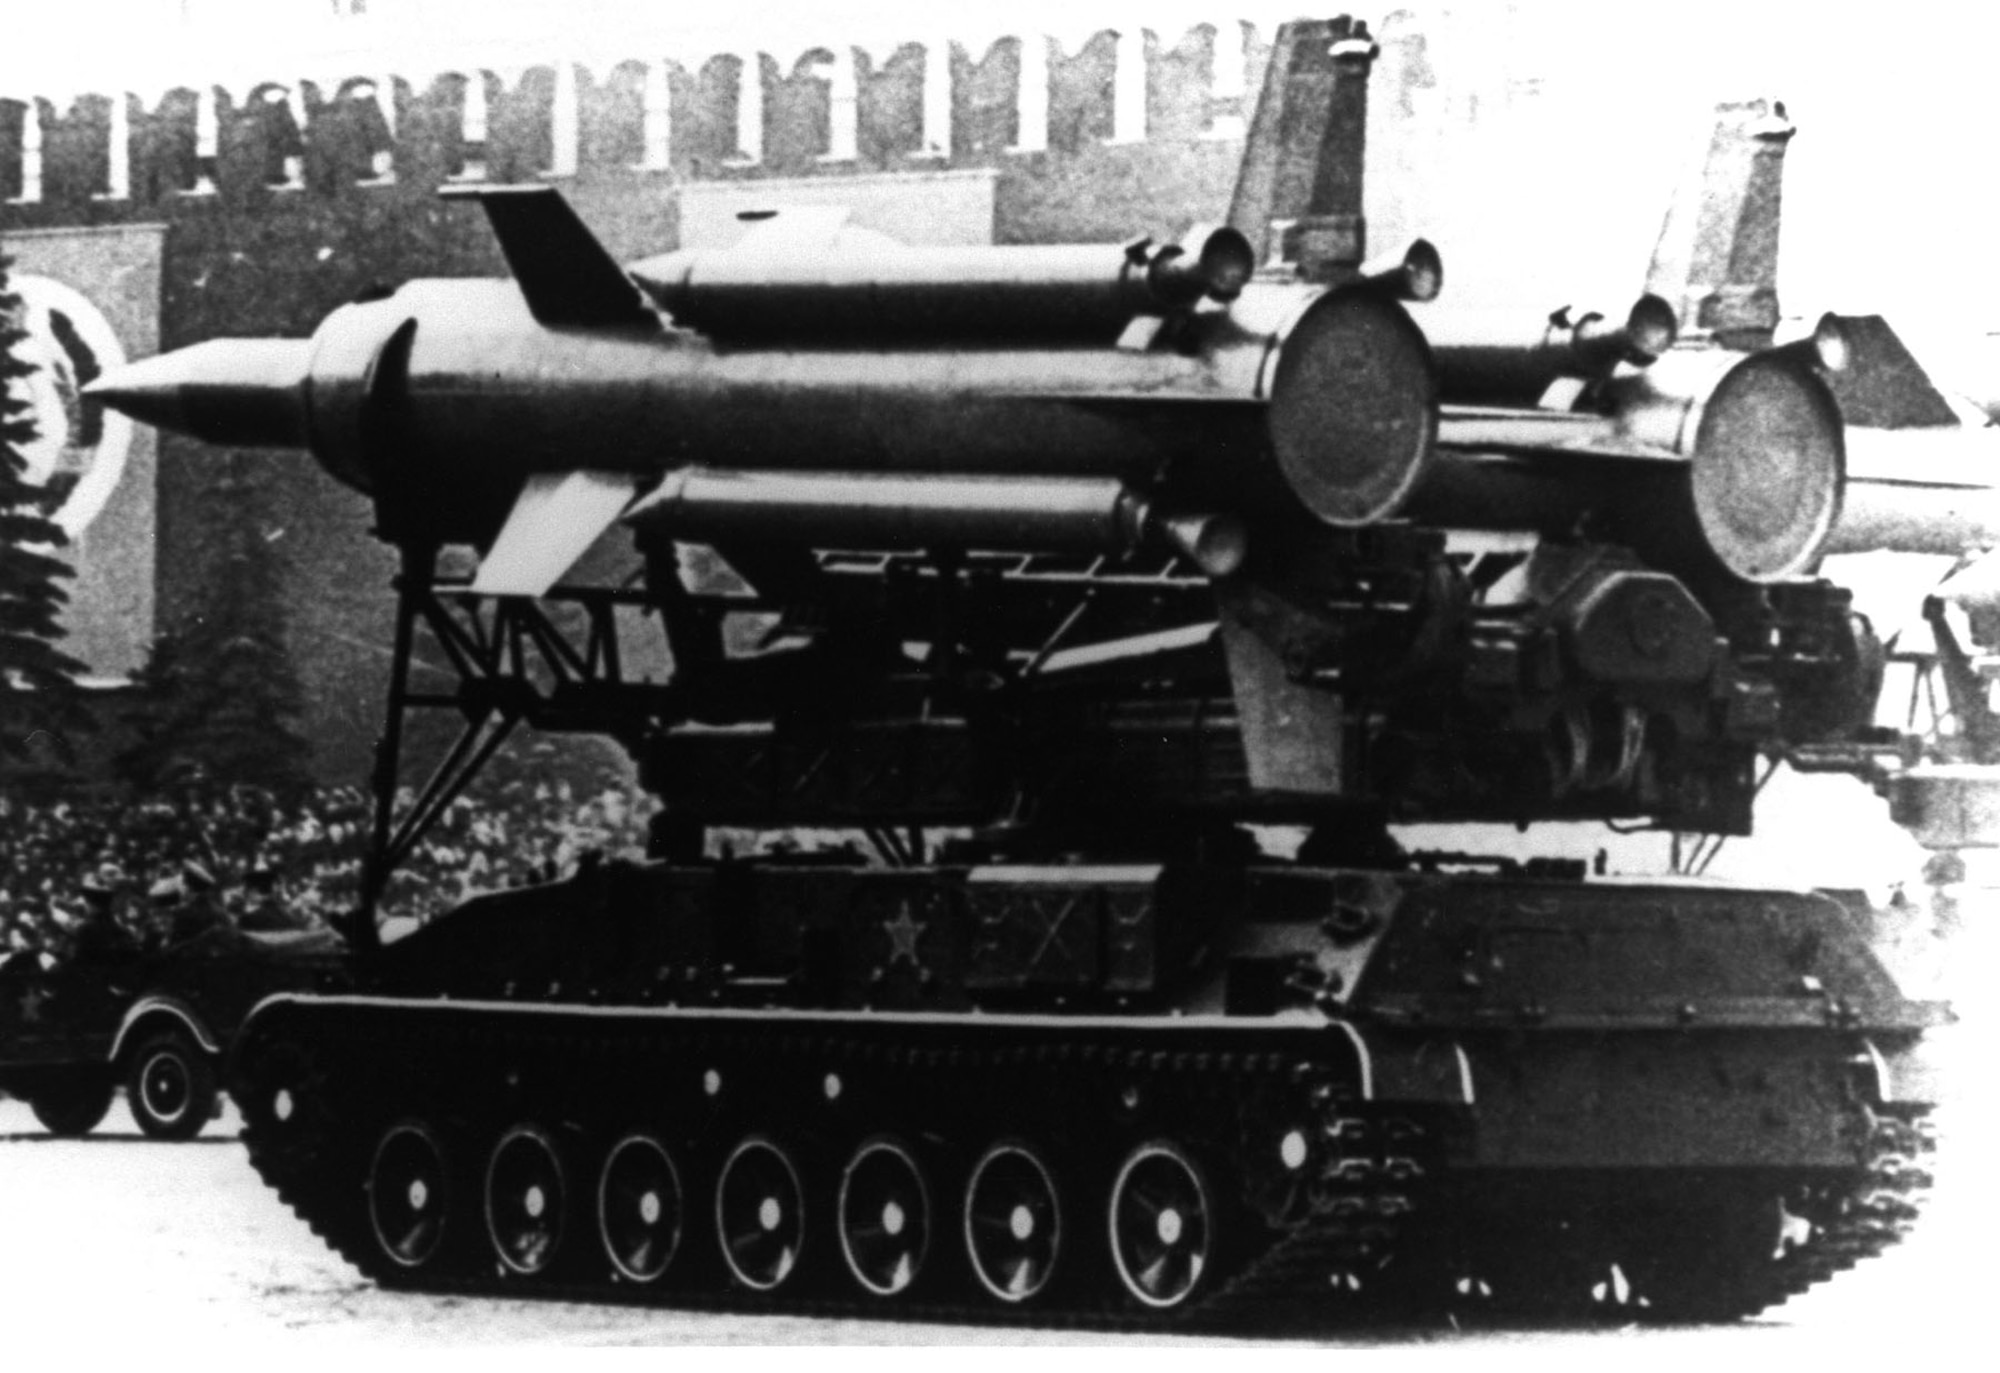 A Soviet SA-4 Ganef on parade. The Soviet, now Russian, SA-4 (NATO designation “Ganef”) is a medium to high altitude surface-to-air missile developed in the late 1950s by the Lyulev OKB design bureau. (U.S. Air Force photo)